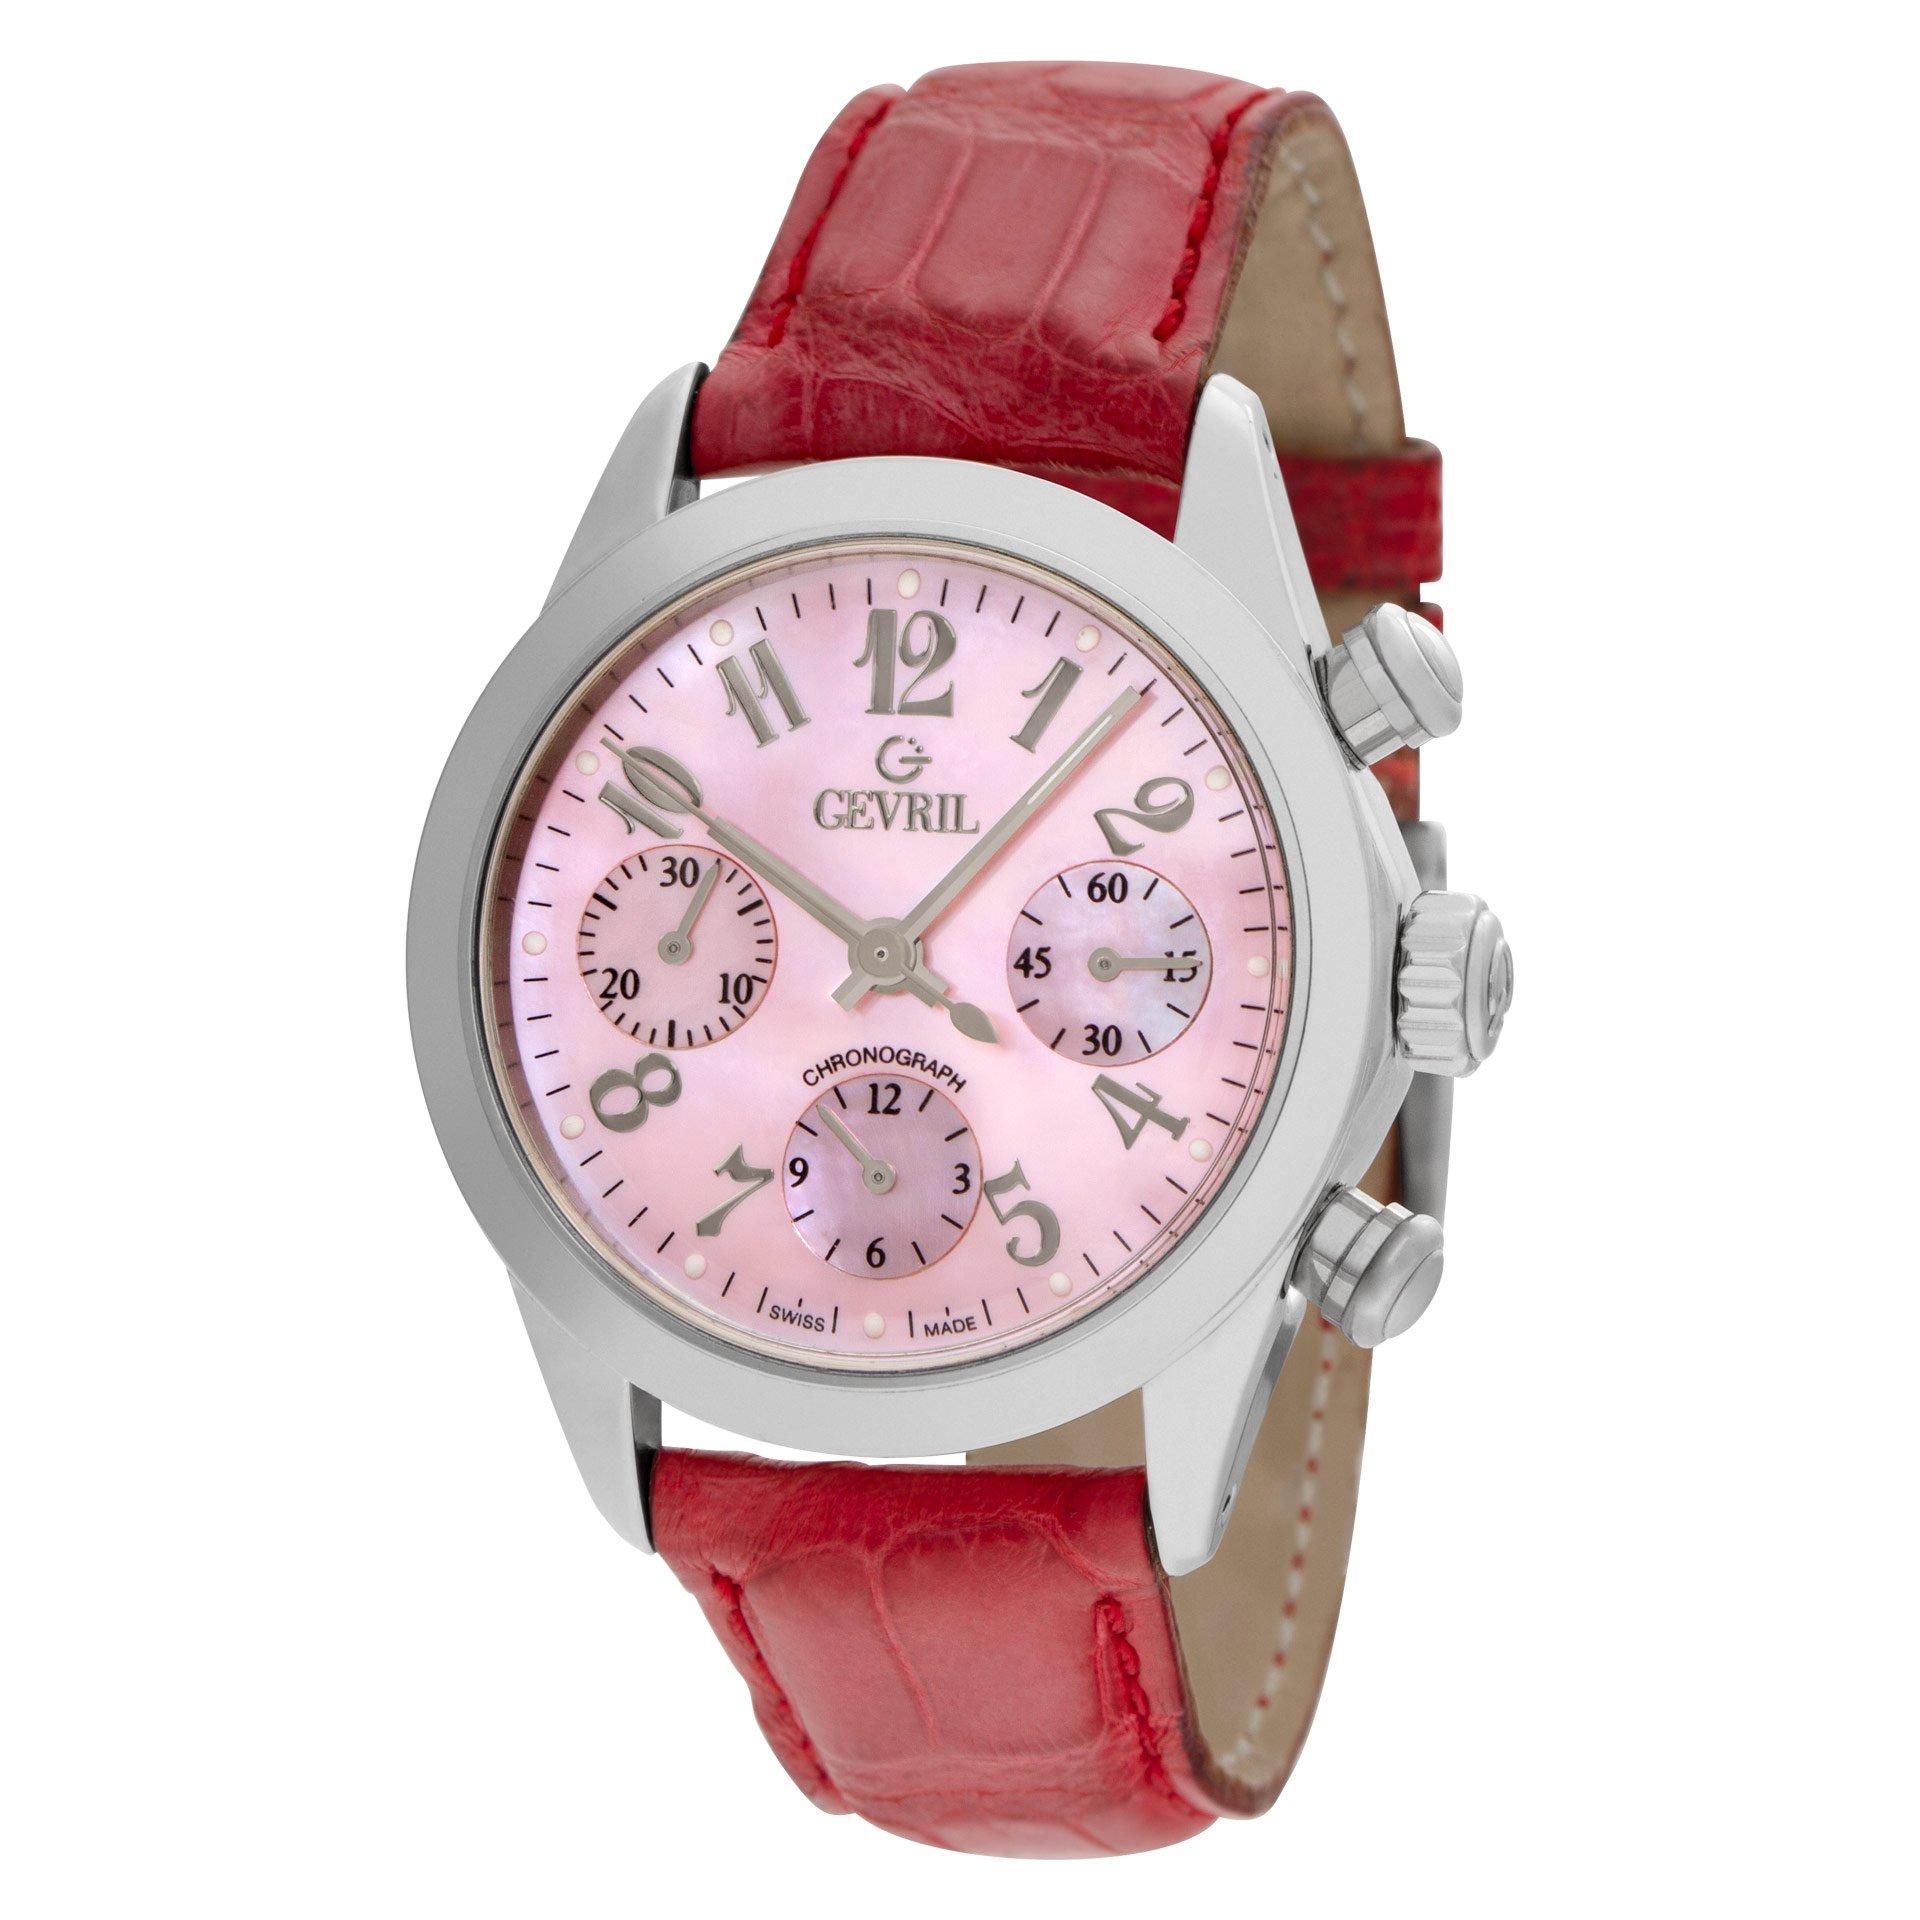 Gevril La Fayette Ref 2900 Stainless Steel Watch, Mother of Pearl Dial ...